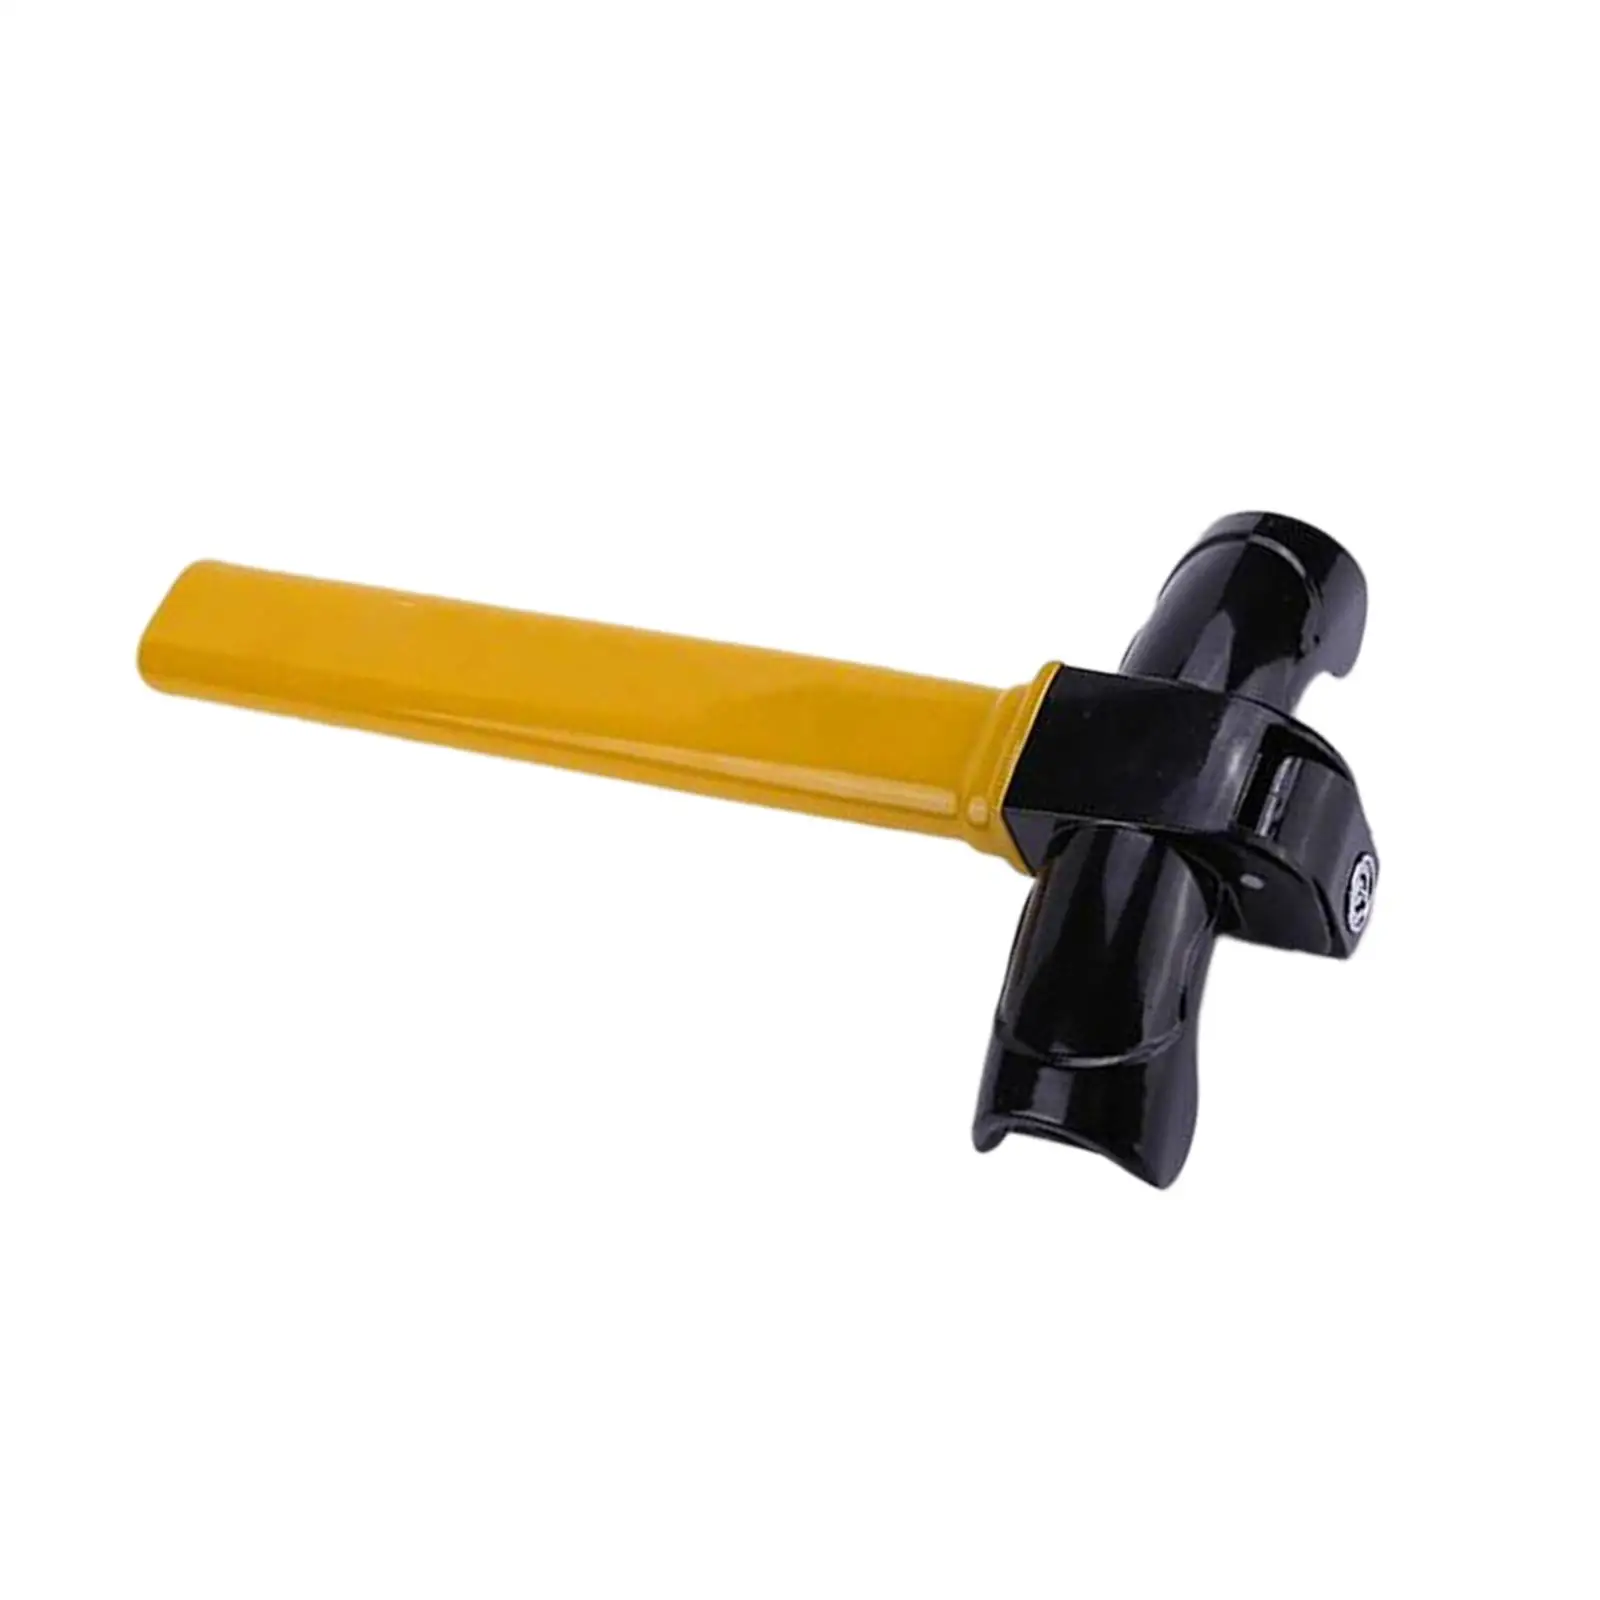 T Shaped Steering Wheel Lock Tool Curved Design Handle Durable for SUV